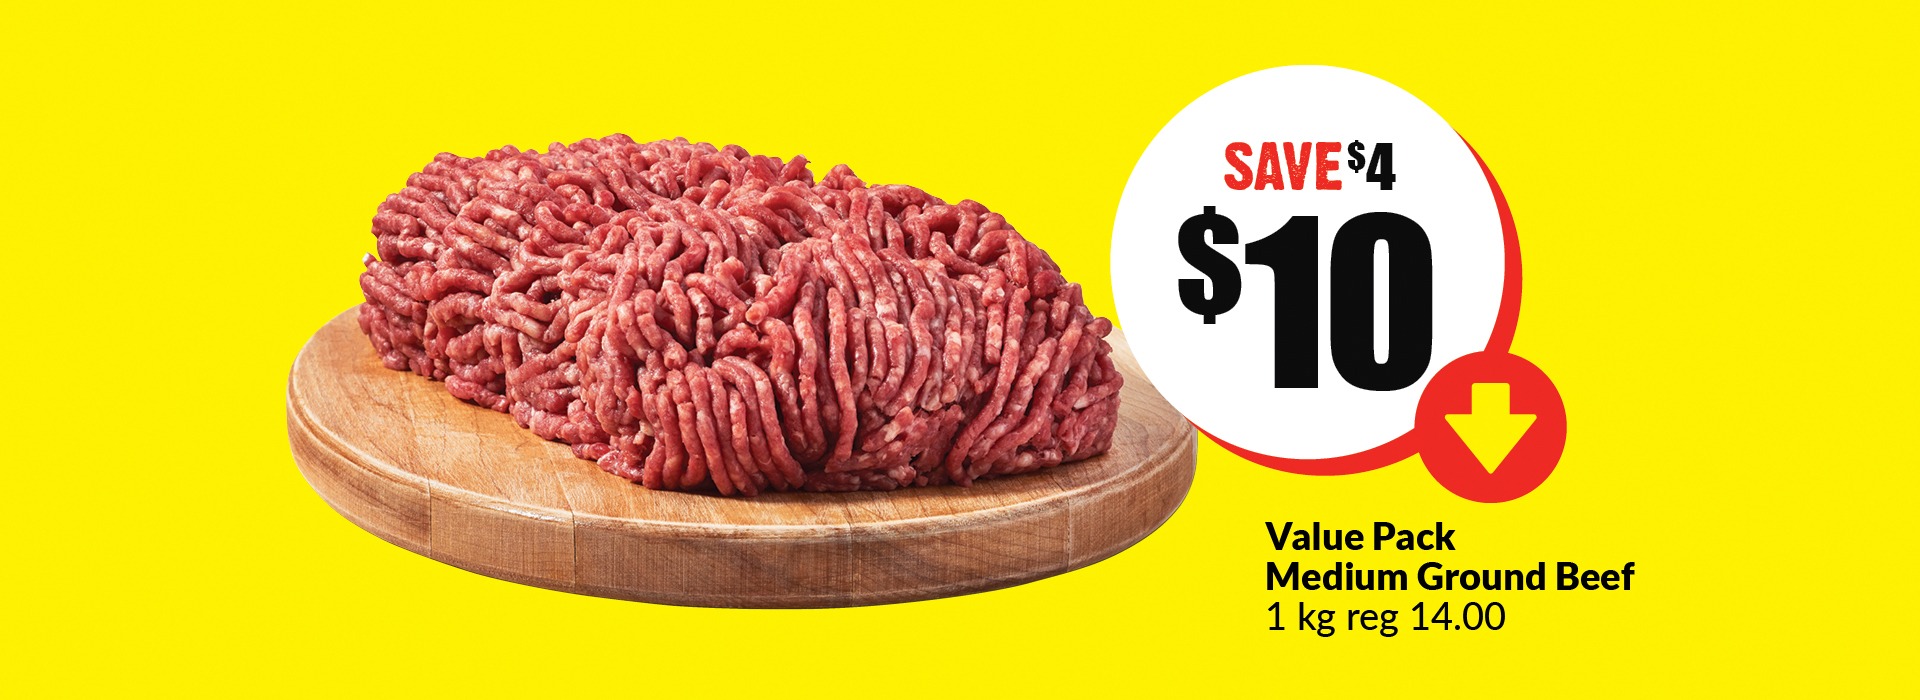 The following image contains the text, "Value pack medium ground beef 1kg reg 14.00. Get them at just $10 and save $4."